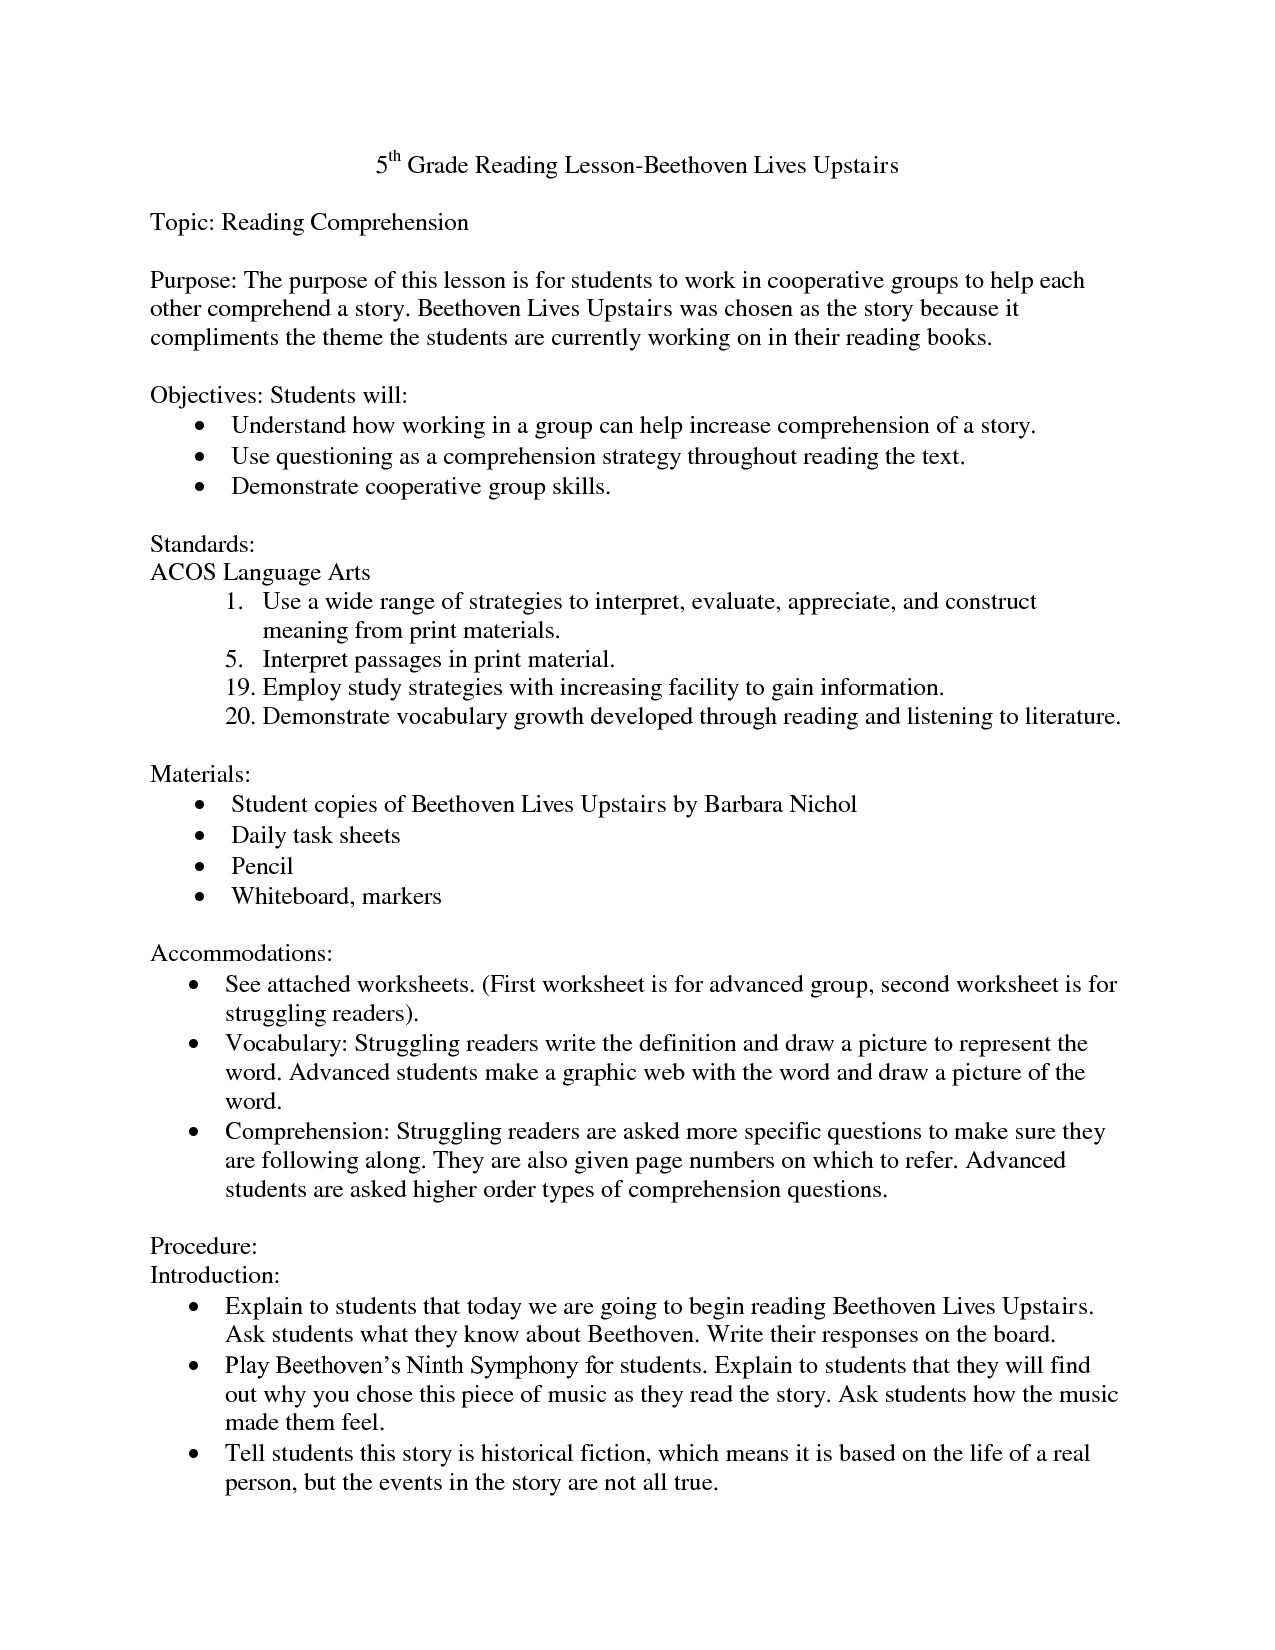 10-best-images-of-reading-comprehension-worksheets-with-answers-short-story-with-questions